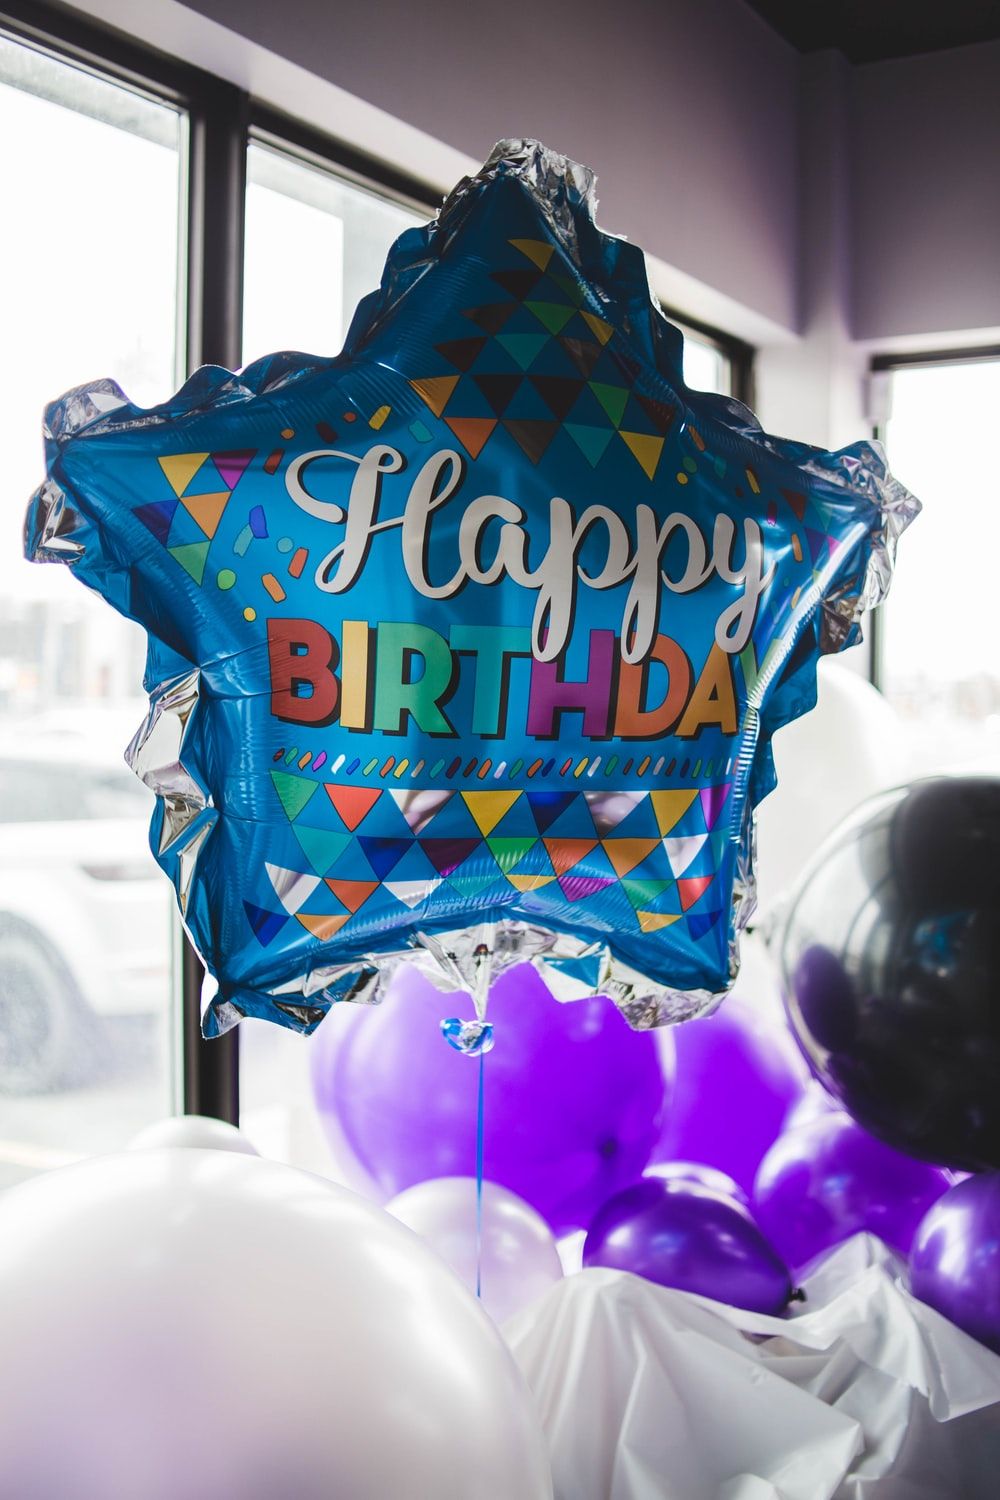 Birthday Party Picture [HD]. Download Free Image